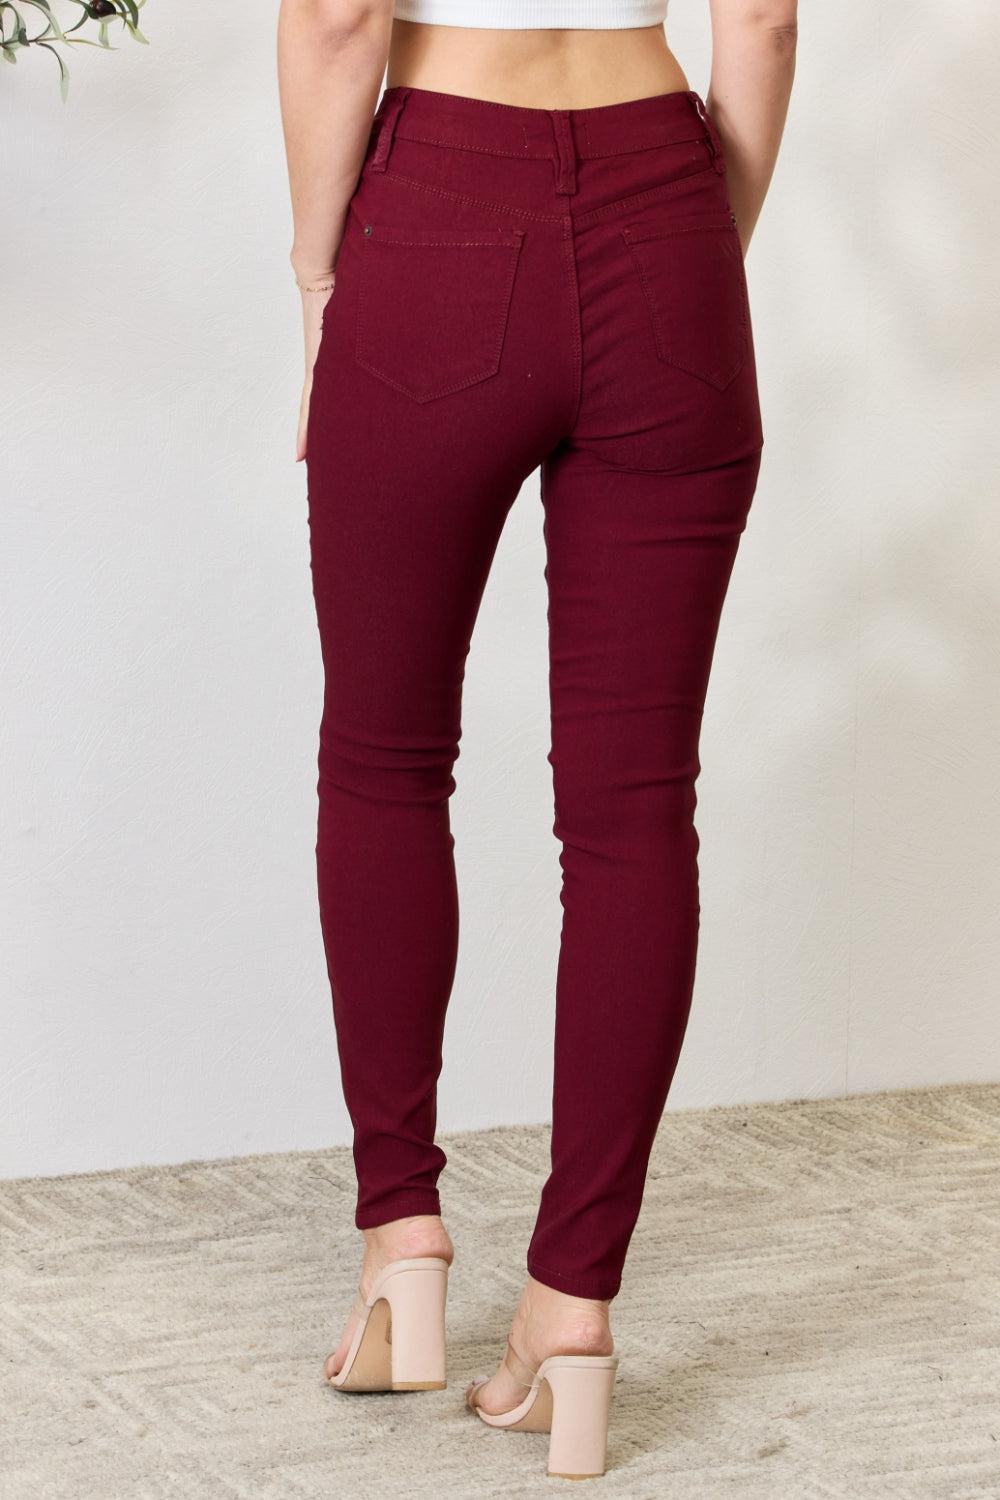 a woman in a white top and maroon pants